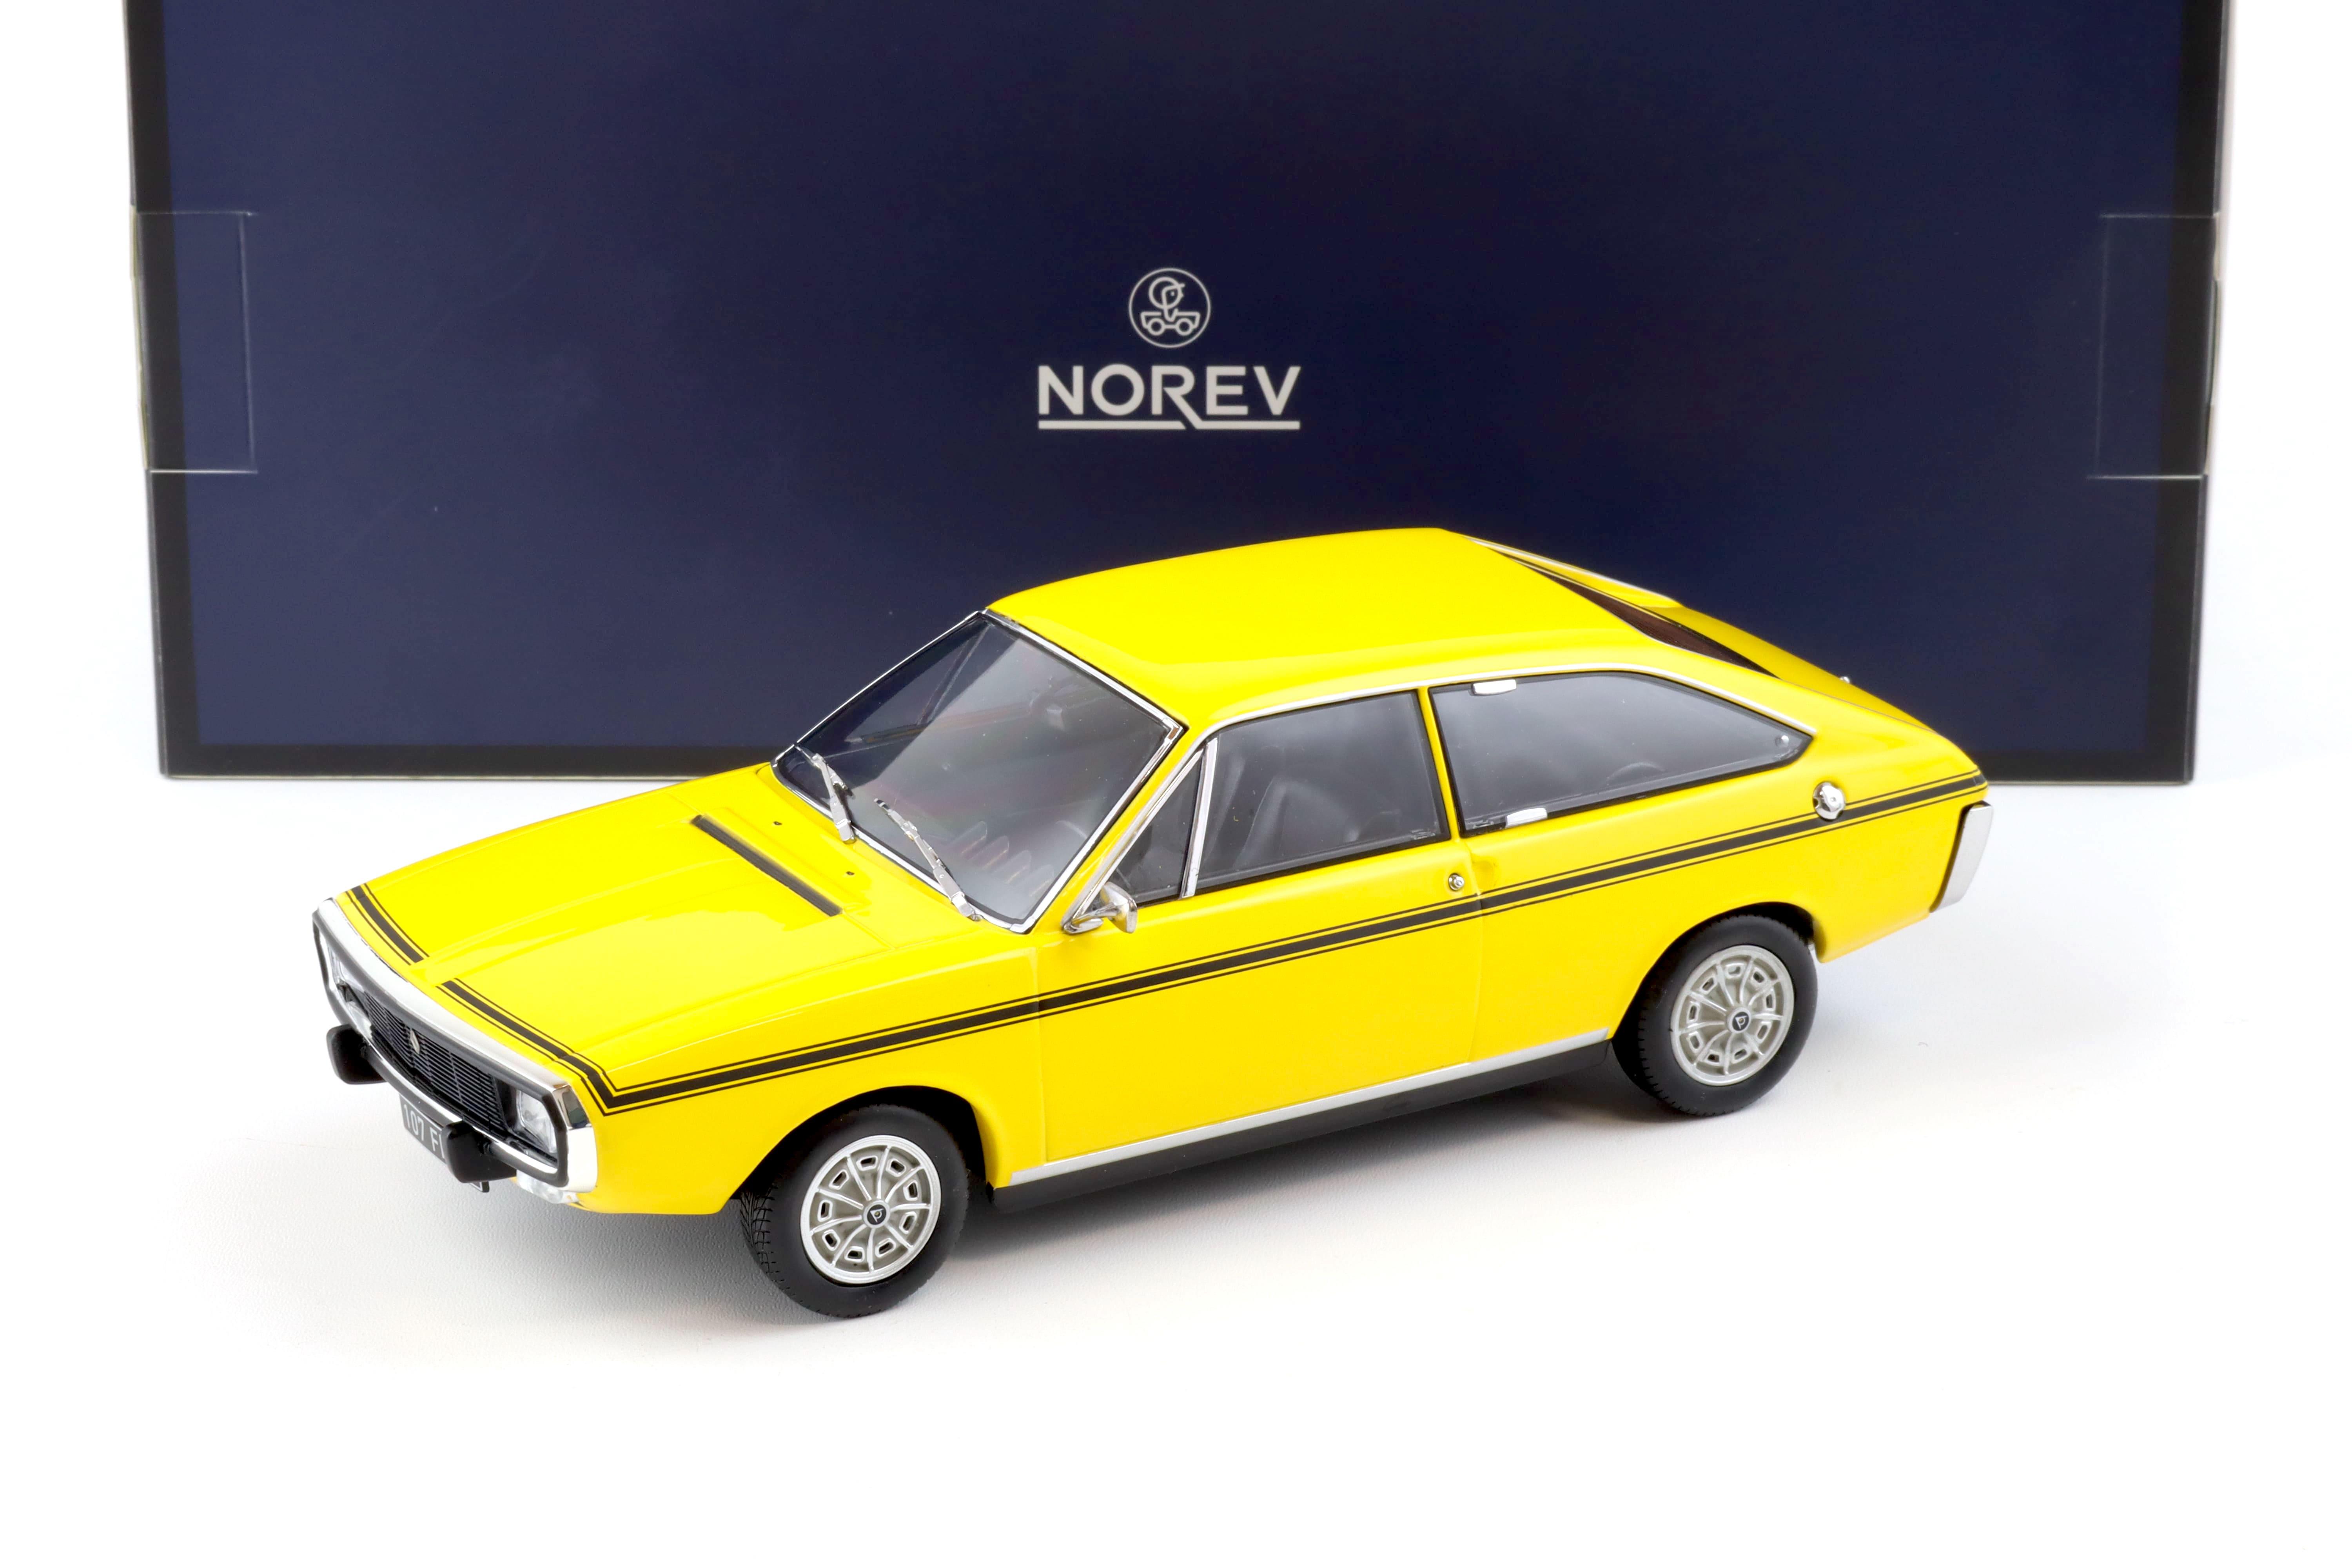 1:18 Norev Renault 15 TL 1973 yellow with black deco - Limited 300 pcs.